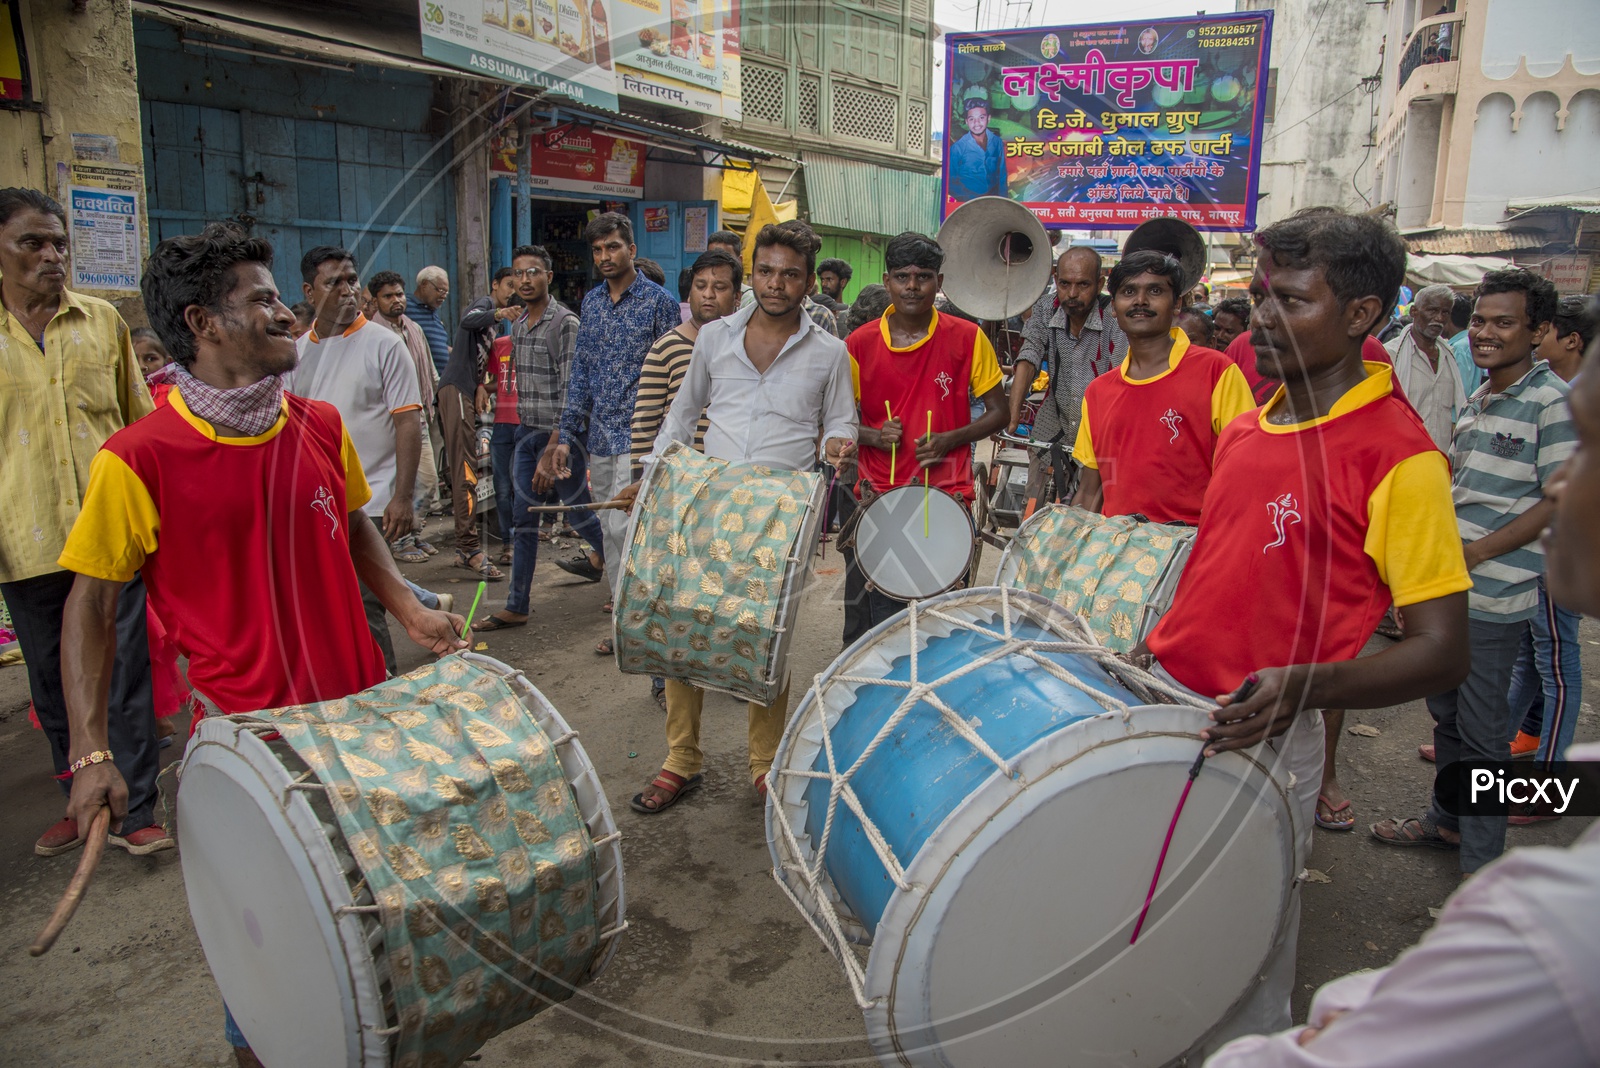 Indian Drum Artists Playing Drums In a Procession